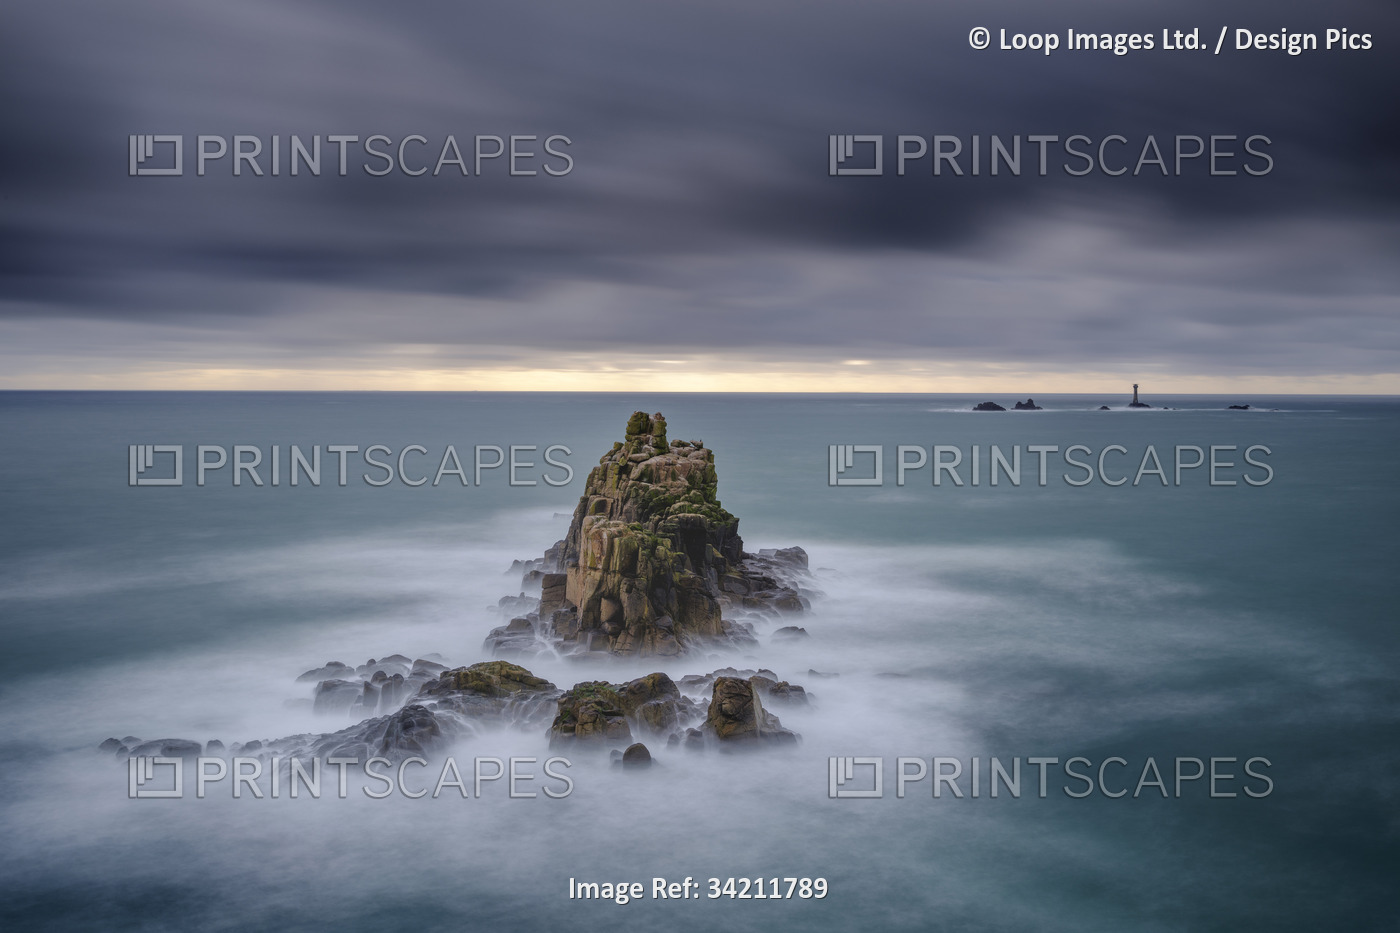 The Armed Knight at Land's End in stormy seas.